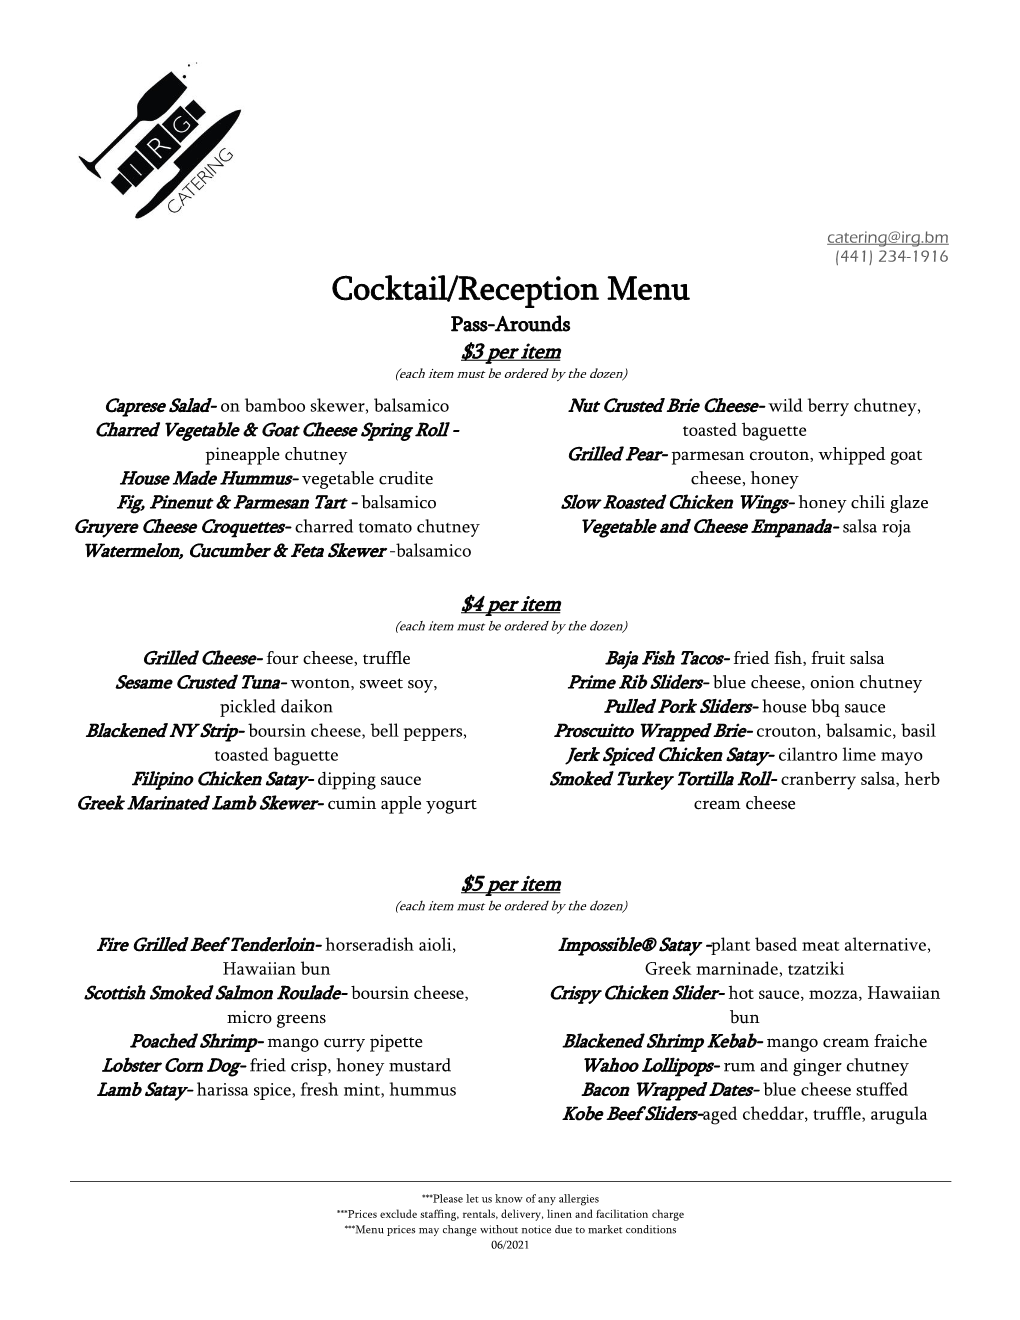 Cocktail/Reception Menu Pass-Arounds $3 Per Item (Each Item Must Be Ordered by the Dozen)